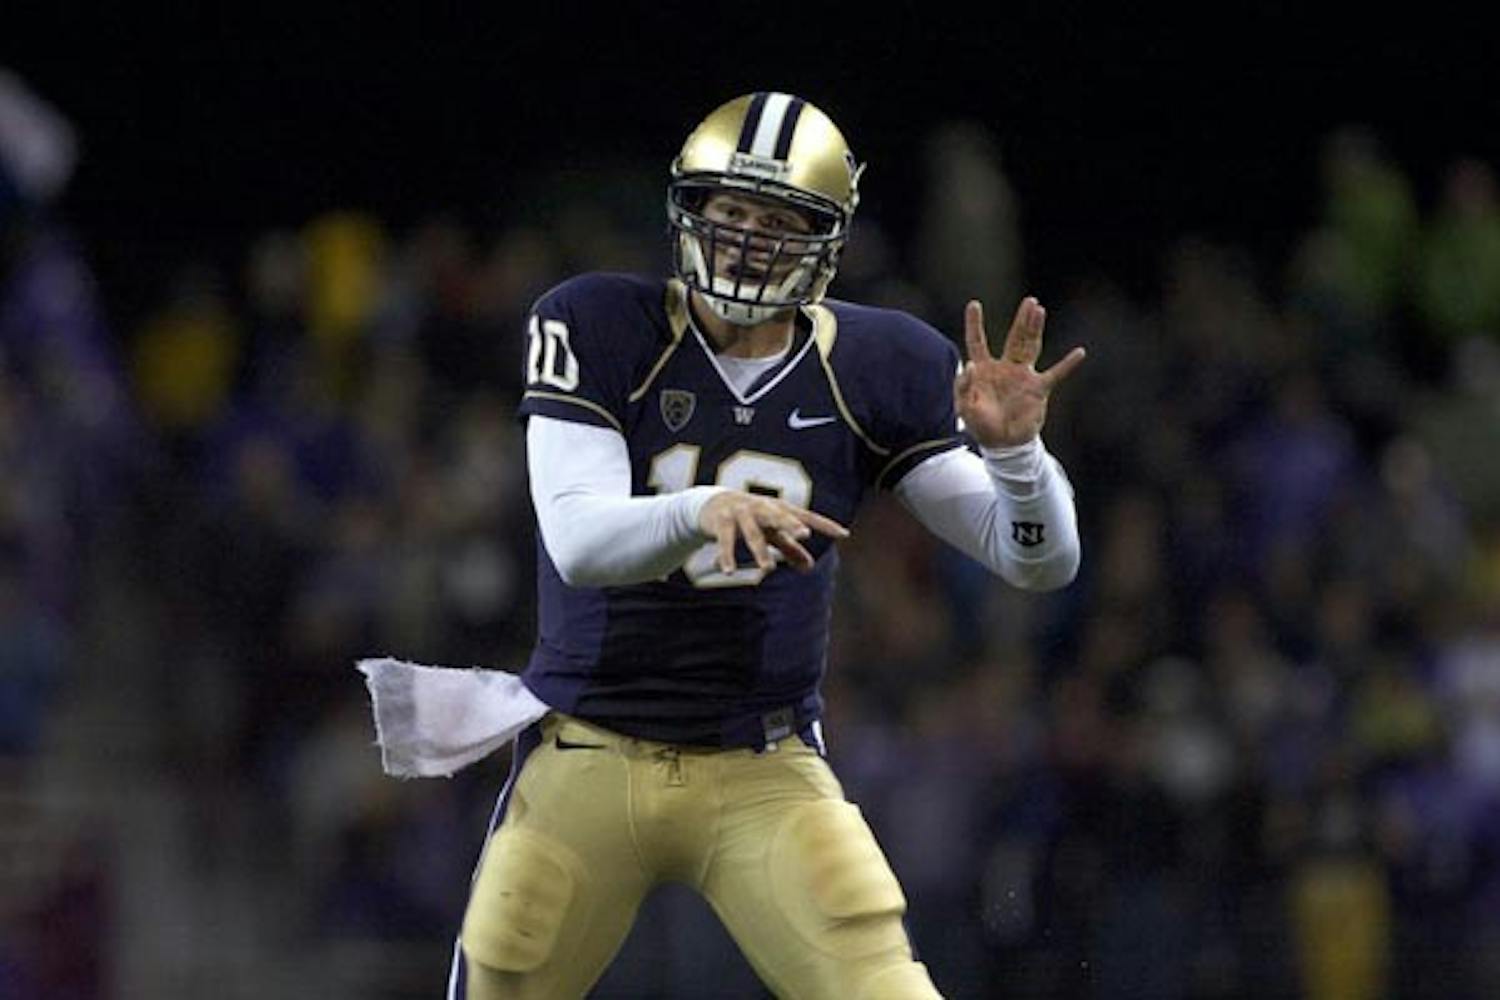 TOP DAWG: UW senior quarterback Jake Locker holds up a "W" after a big play against ASU on Saturday. Locker's running ability was limited in the game, which the Huskies lost 24-14. (Photo by Scott Stuk)